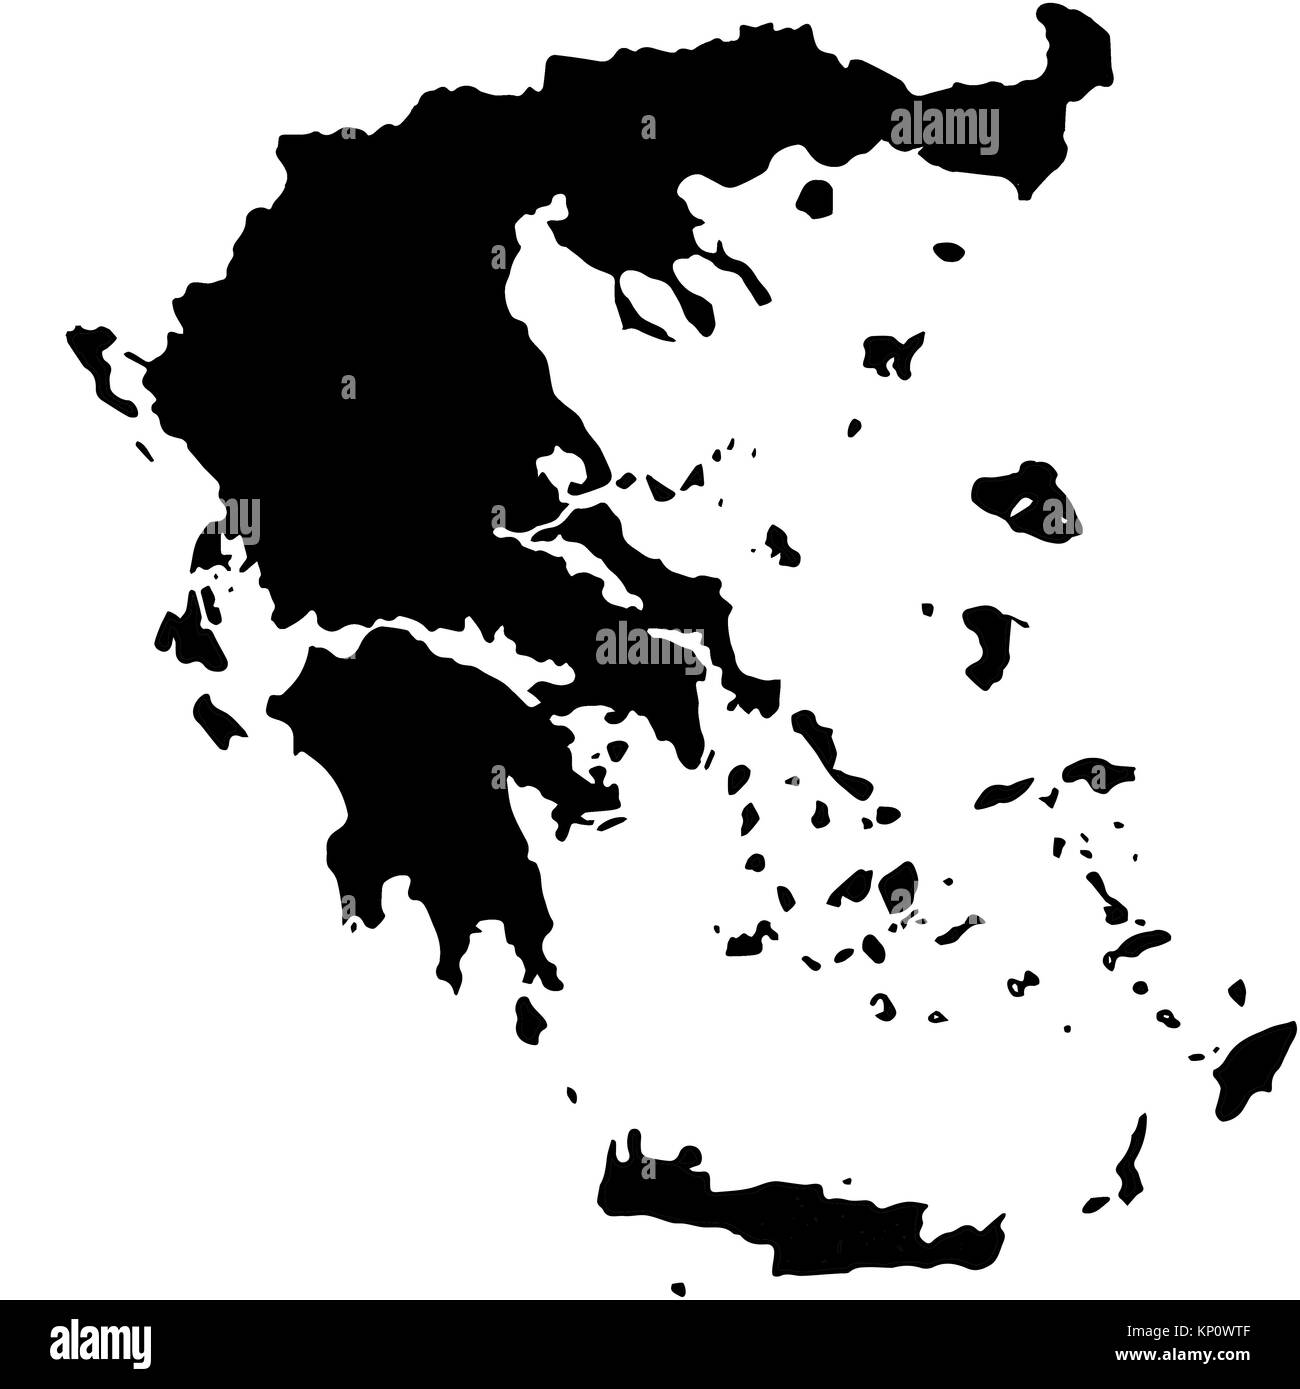 Greece country Map illustration black. Stock Photo